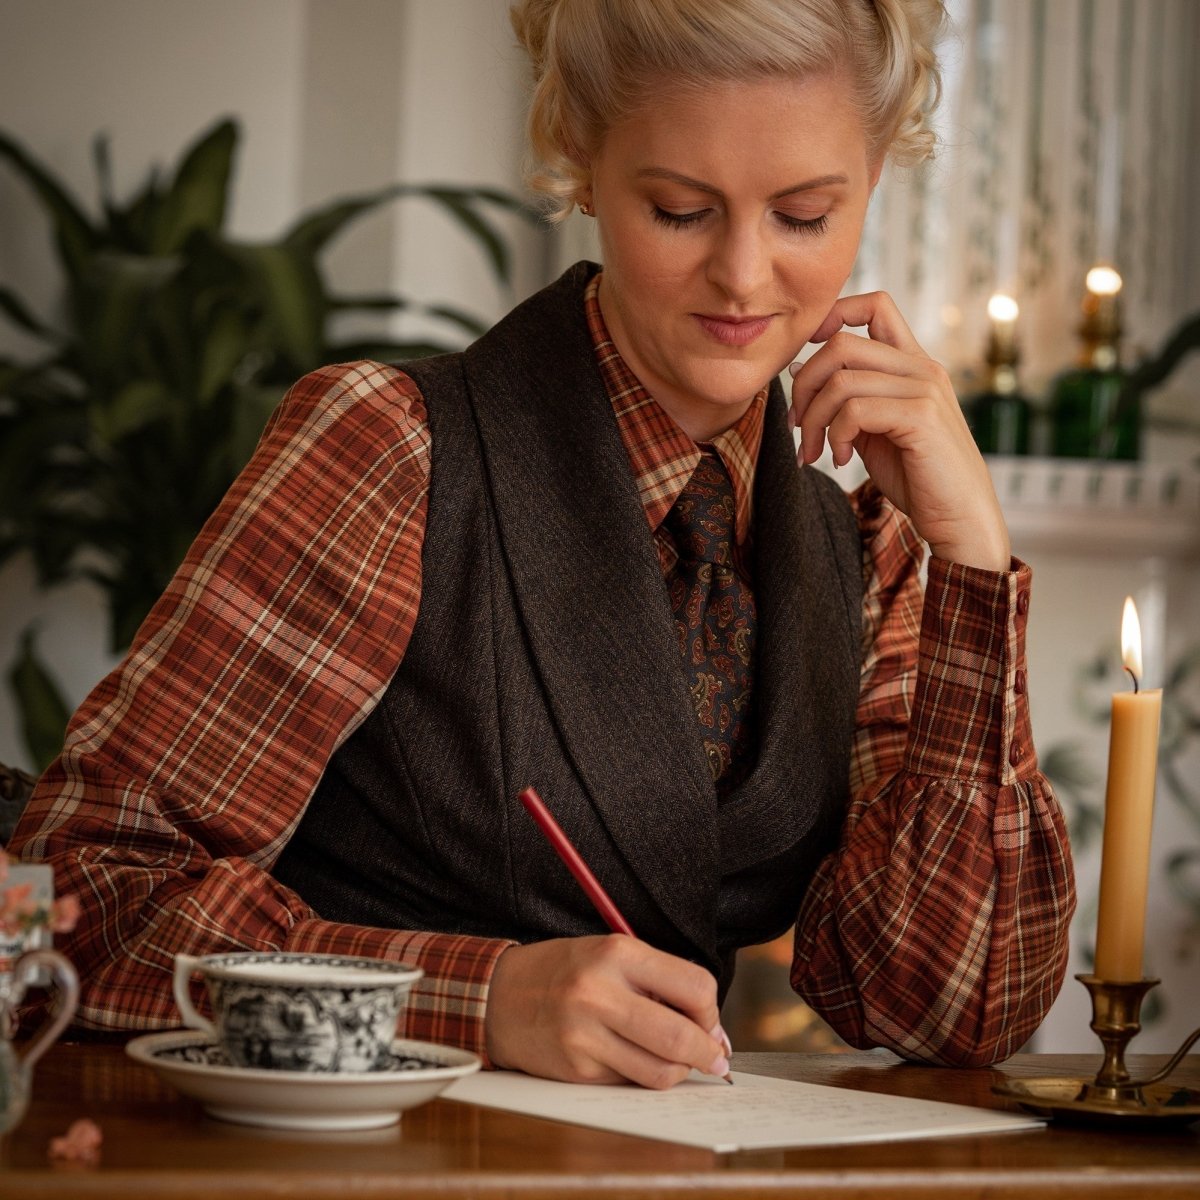 Designer Emmy from Emmy Design Sweden wear the Bishopess Blouse in rusty plaid, a long sleeved vintage inspired blouse, underneath a waistcoat with a dark printed tie. She sits at a vintage desk writing